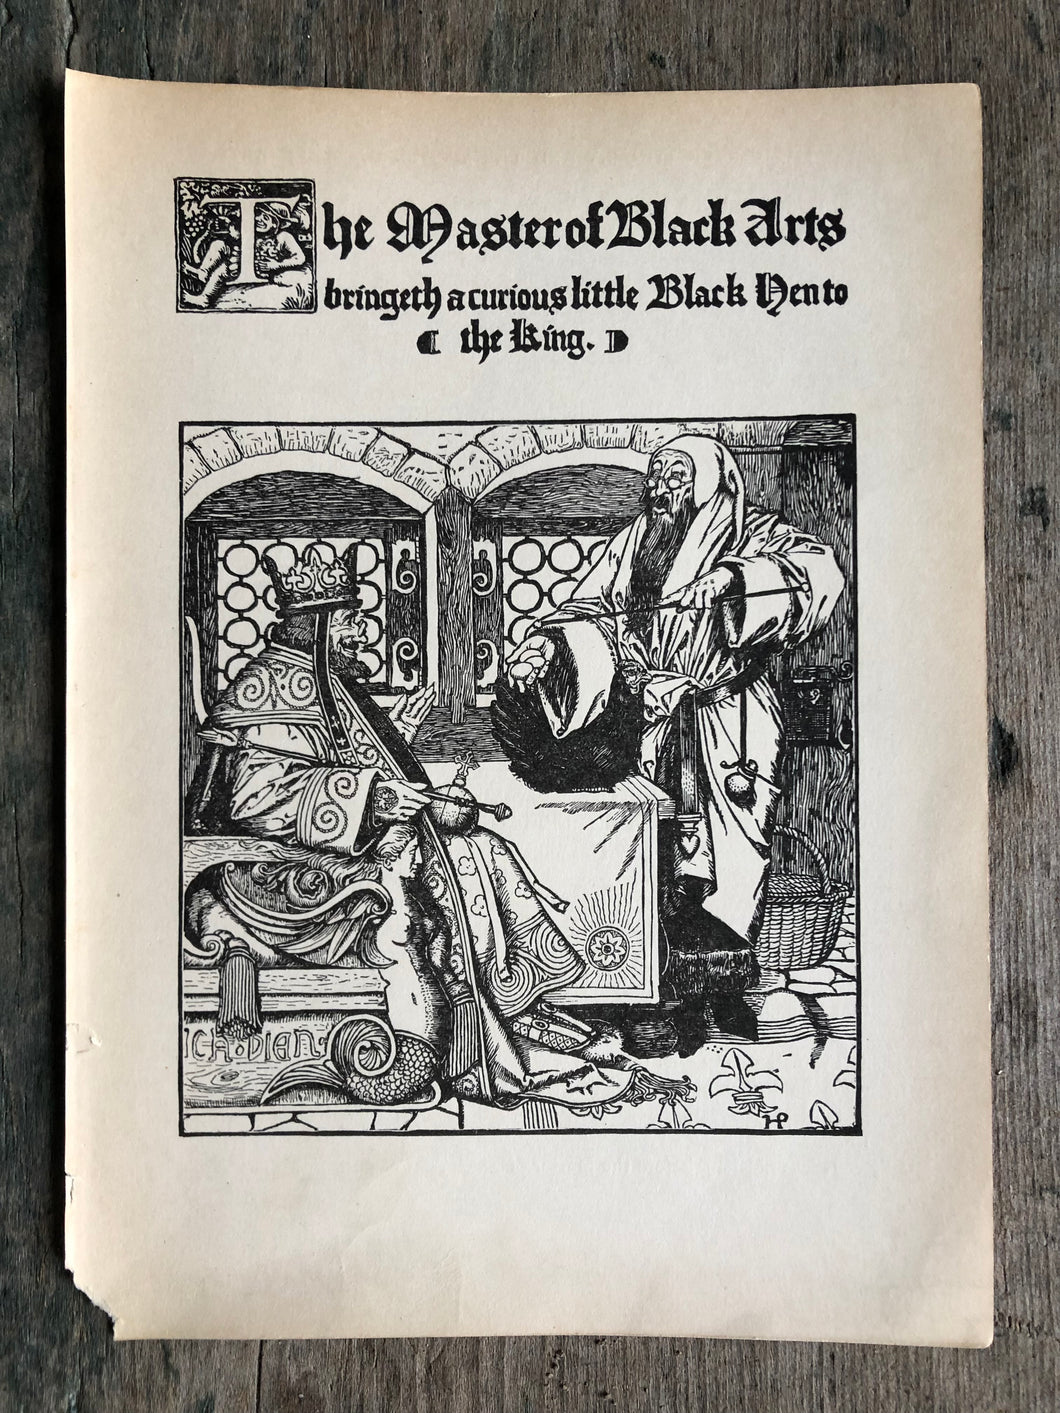 Print from The Wonder Clock by Howard Pyle